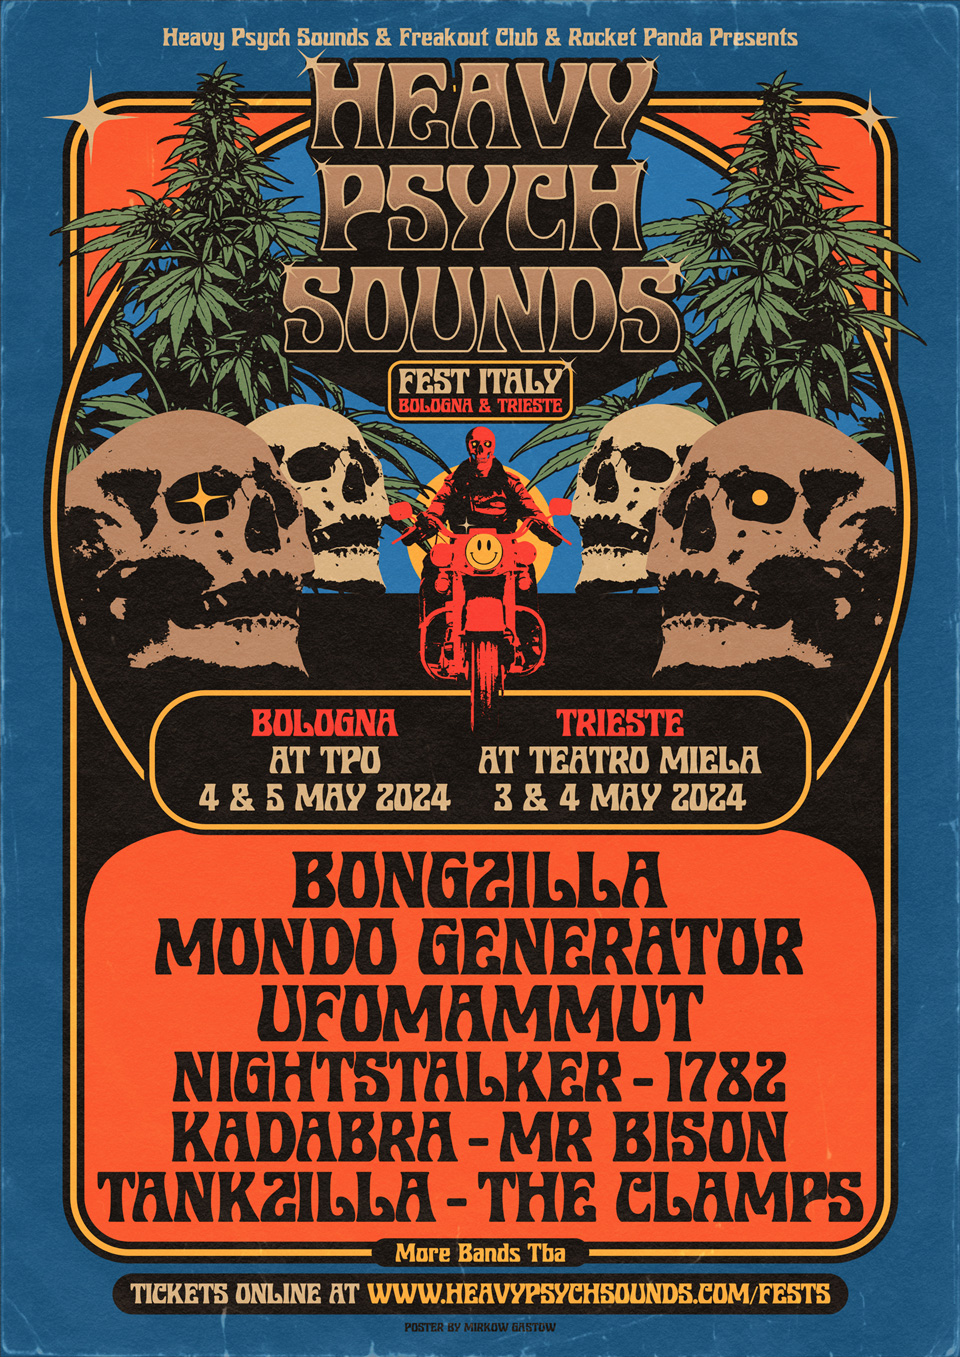 Heavy Psych Sounds Fest Italy